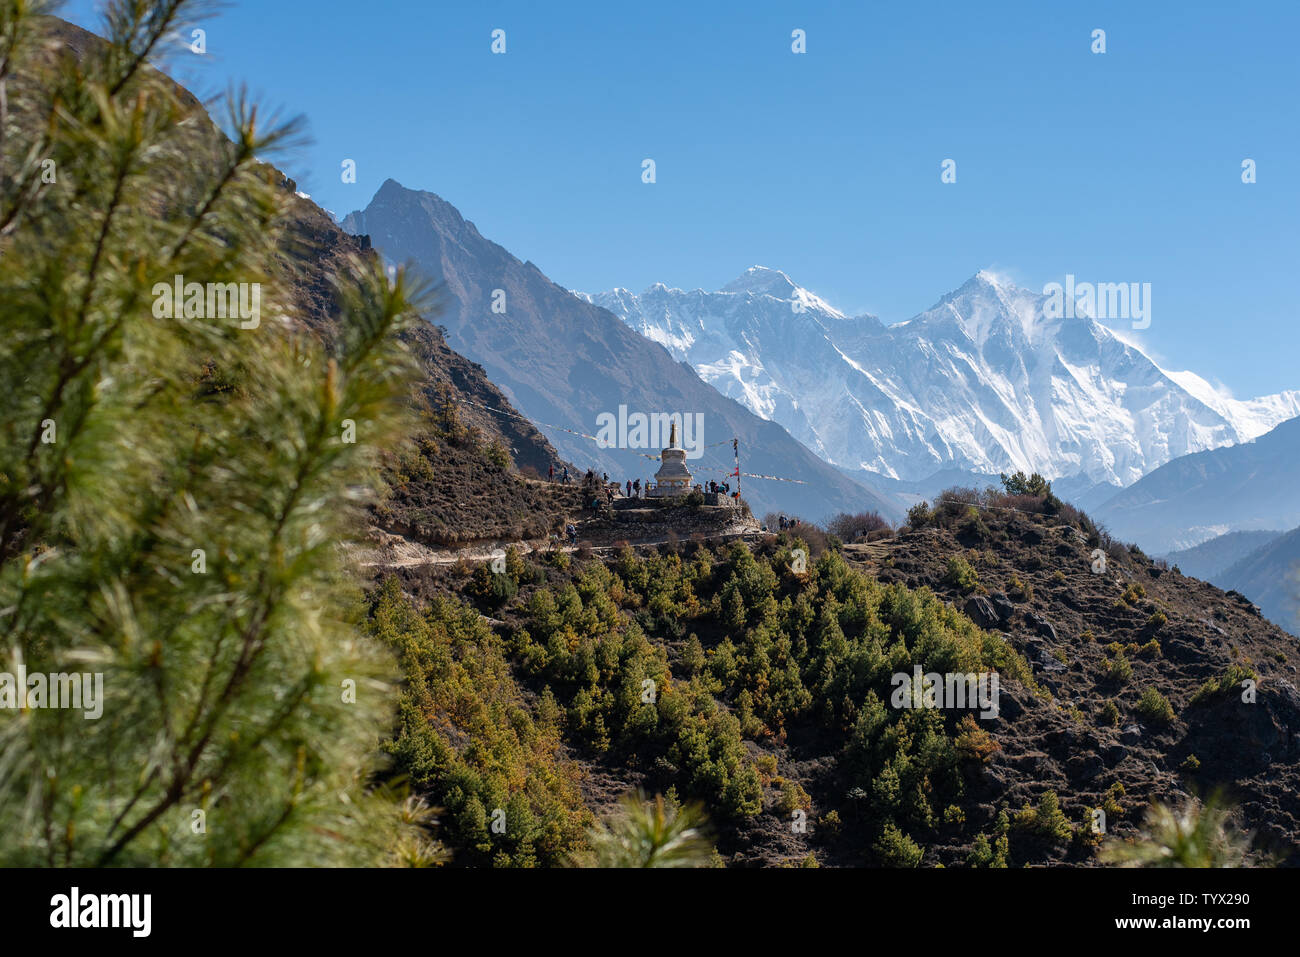 Nepalese Himalayan scenery, tourists around religious monument, Mount Everest and Lhotse in background Stock Photo